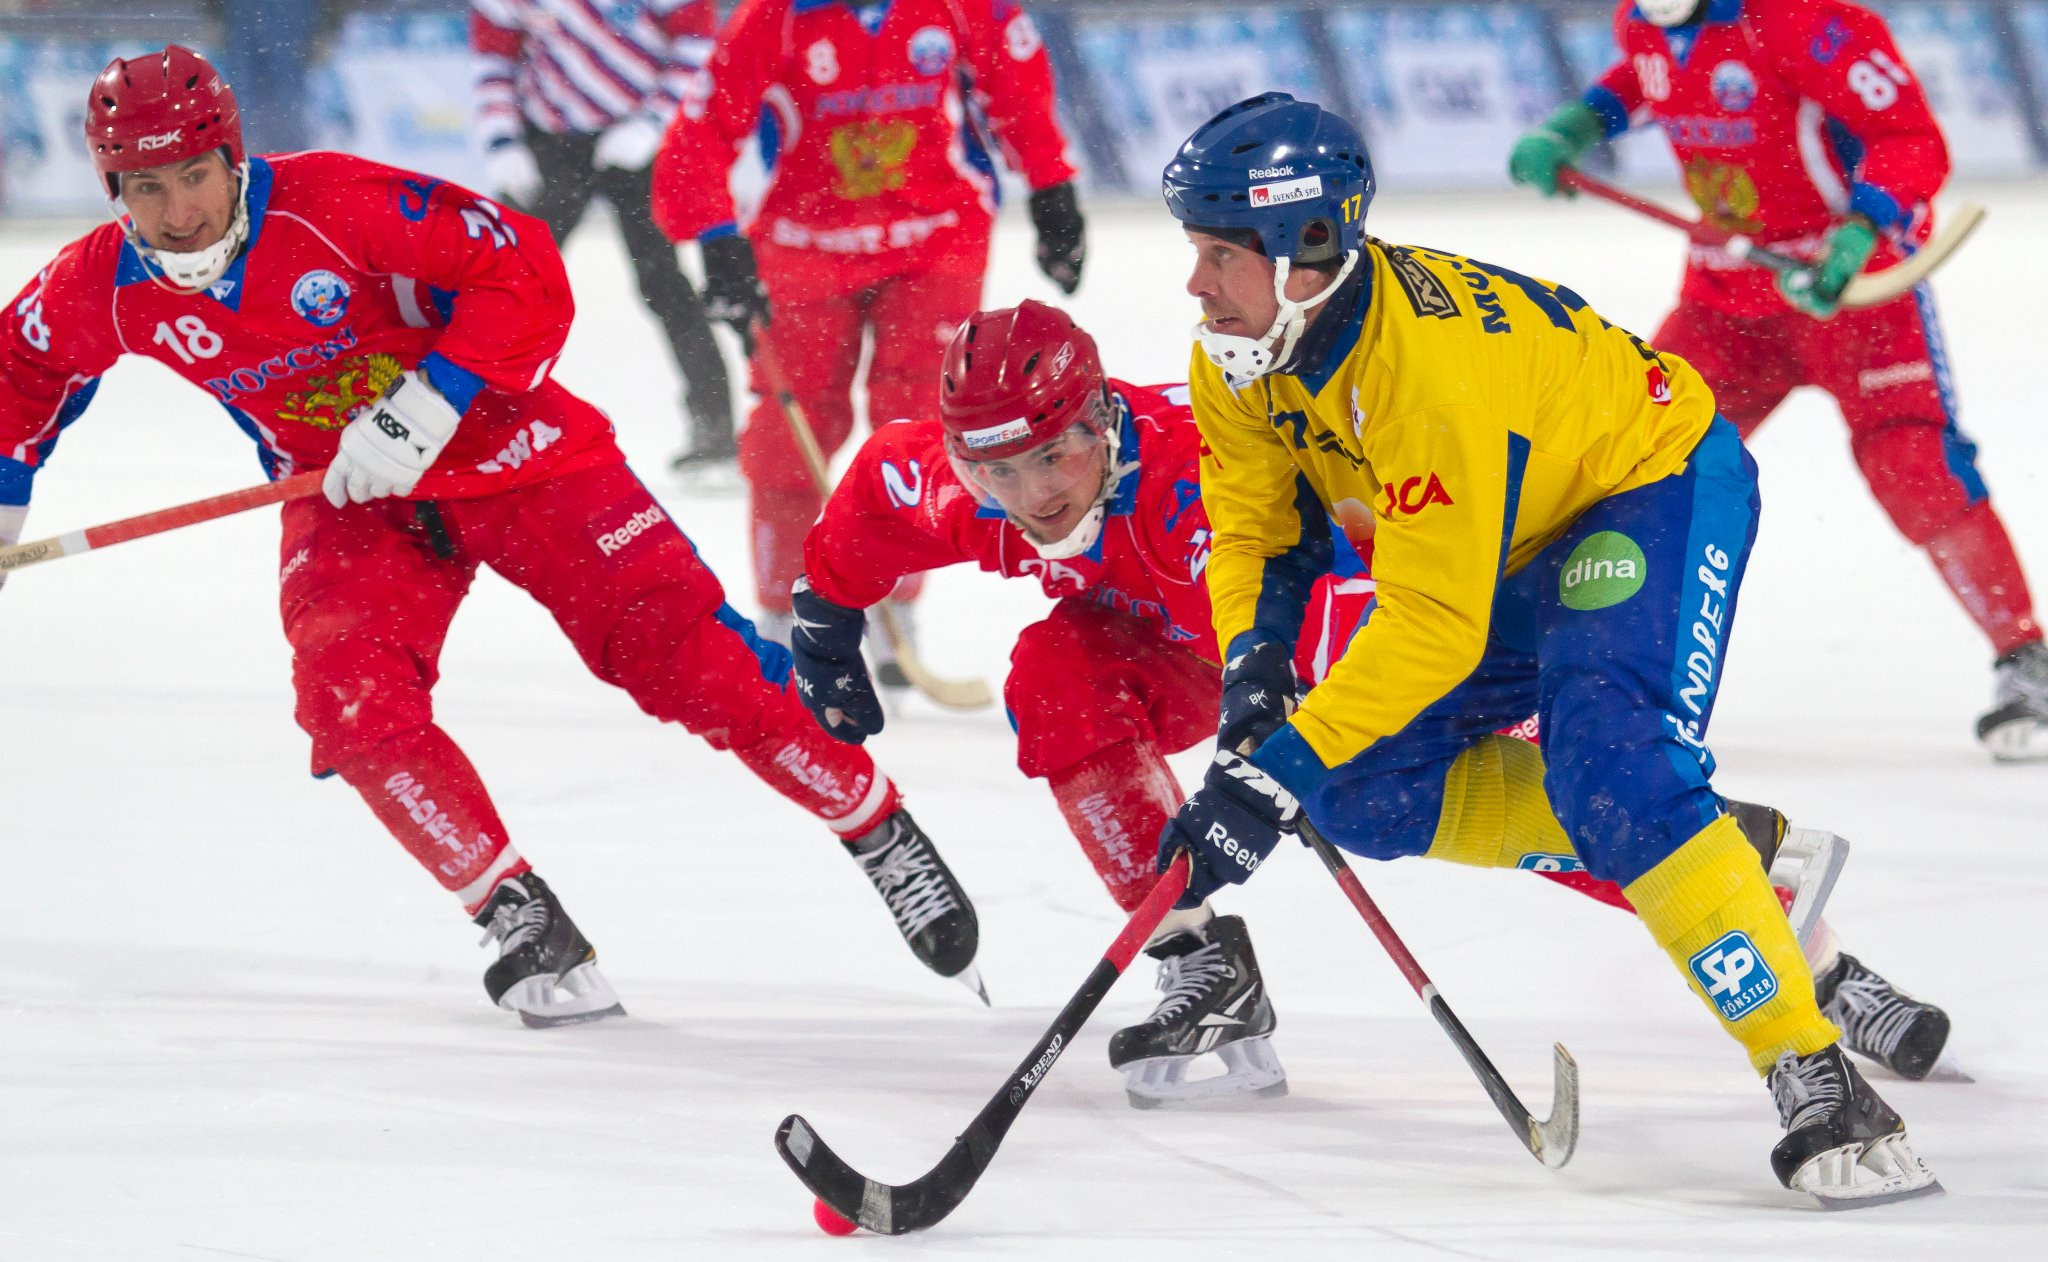 Russia, in red, and Sweden, in yellow, have contested each of the eight finals in the history of the Women's Bandy World Championship ©FIB